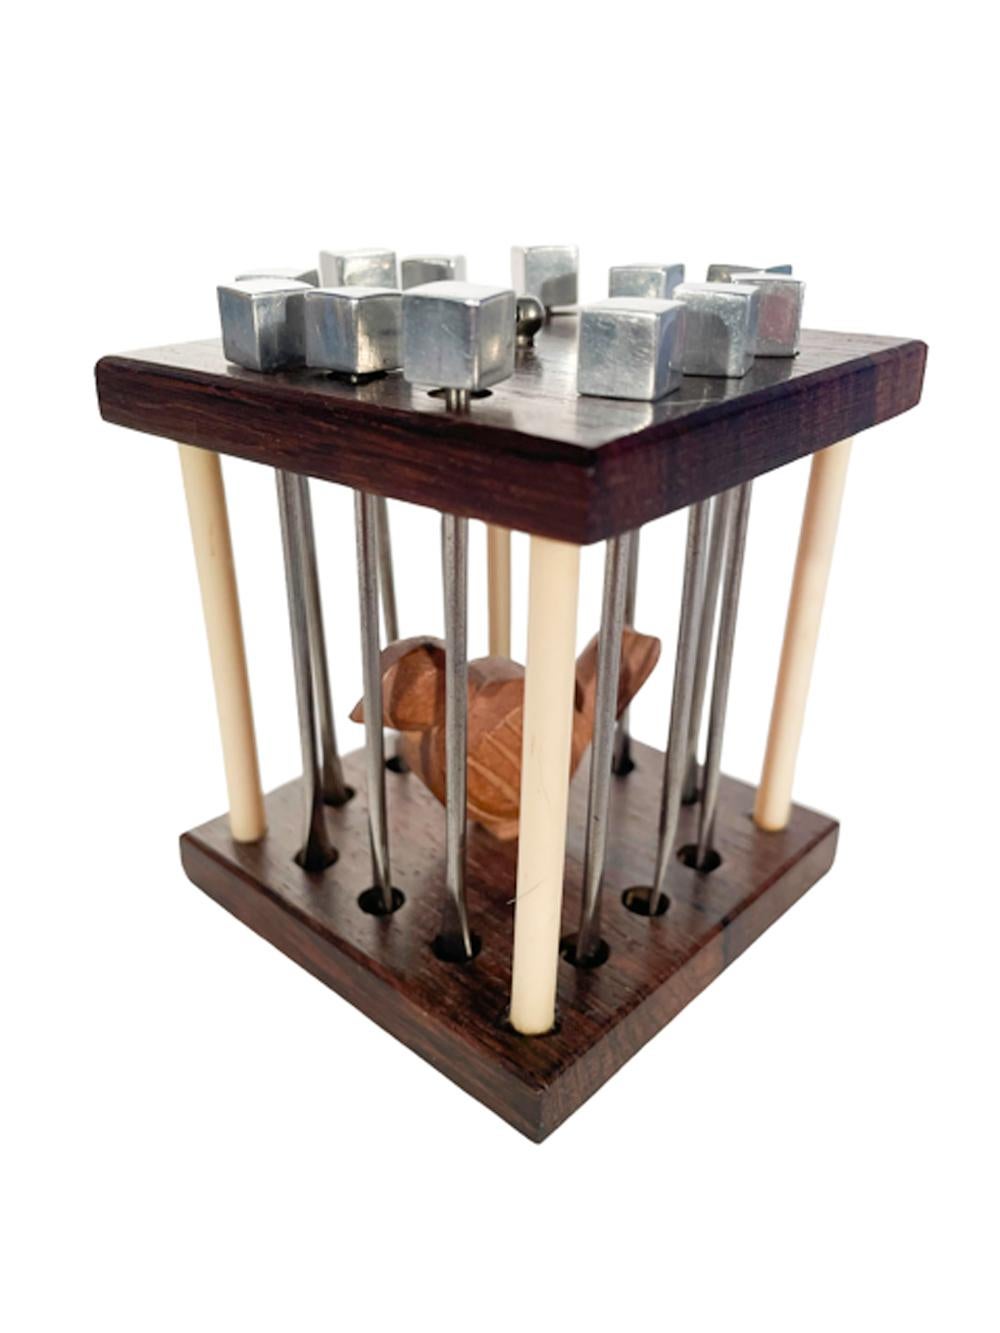 French Art Deco caged bird cocktail pick set, two pieces of wood supported at the corners with white Bakelite poles creating an open cube, the chrome picks with block tops hang three to a side forming the bars and caging the carved wood bird inside.